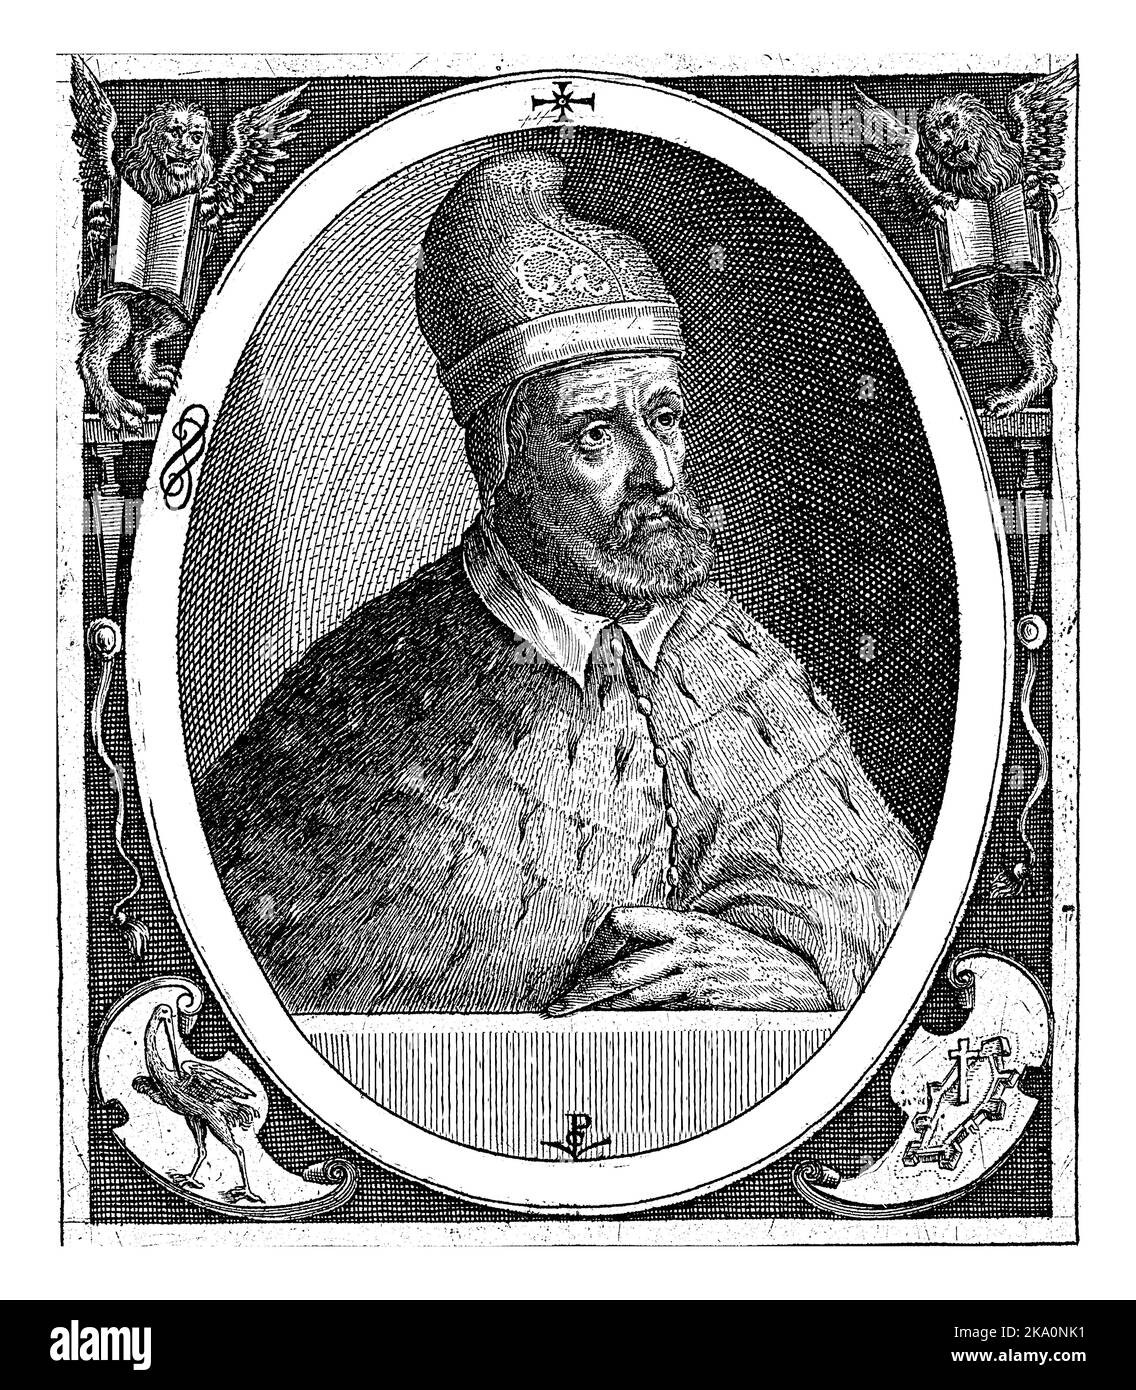 Portrait of the Venetian Doge Paschalis Ciconia, underneath his motto in Latin. He wears a doge's hat. In the edge lettering of the frame the name and Stock Photo